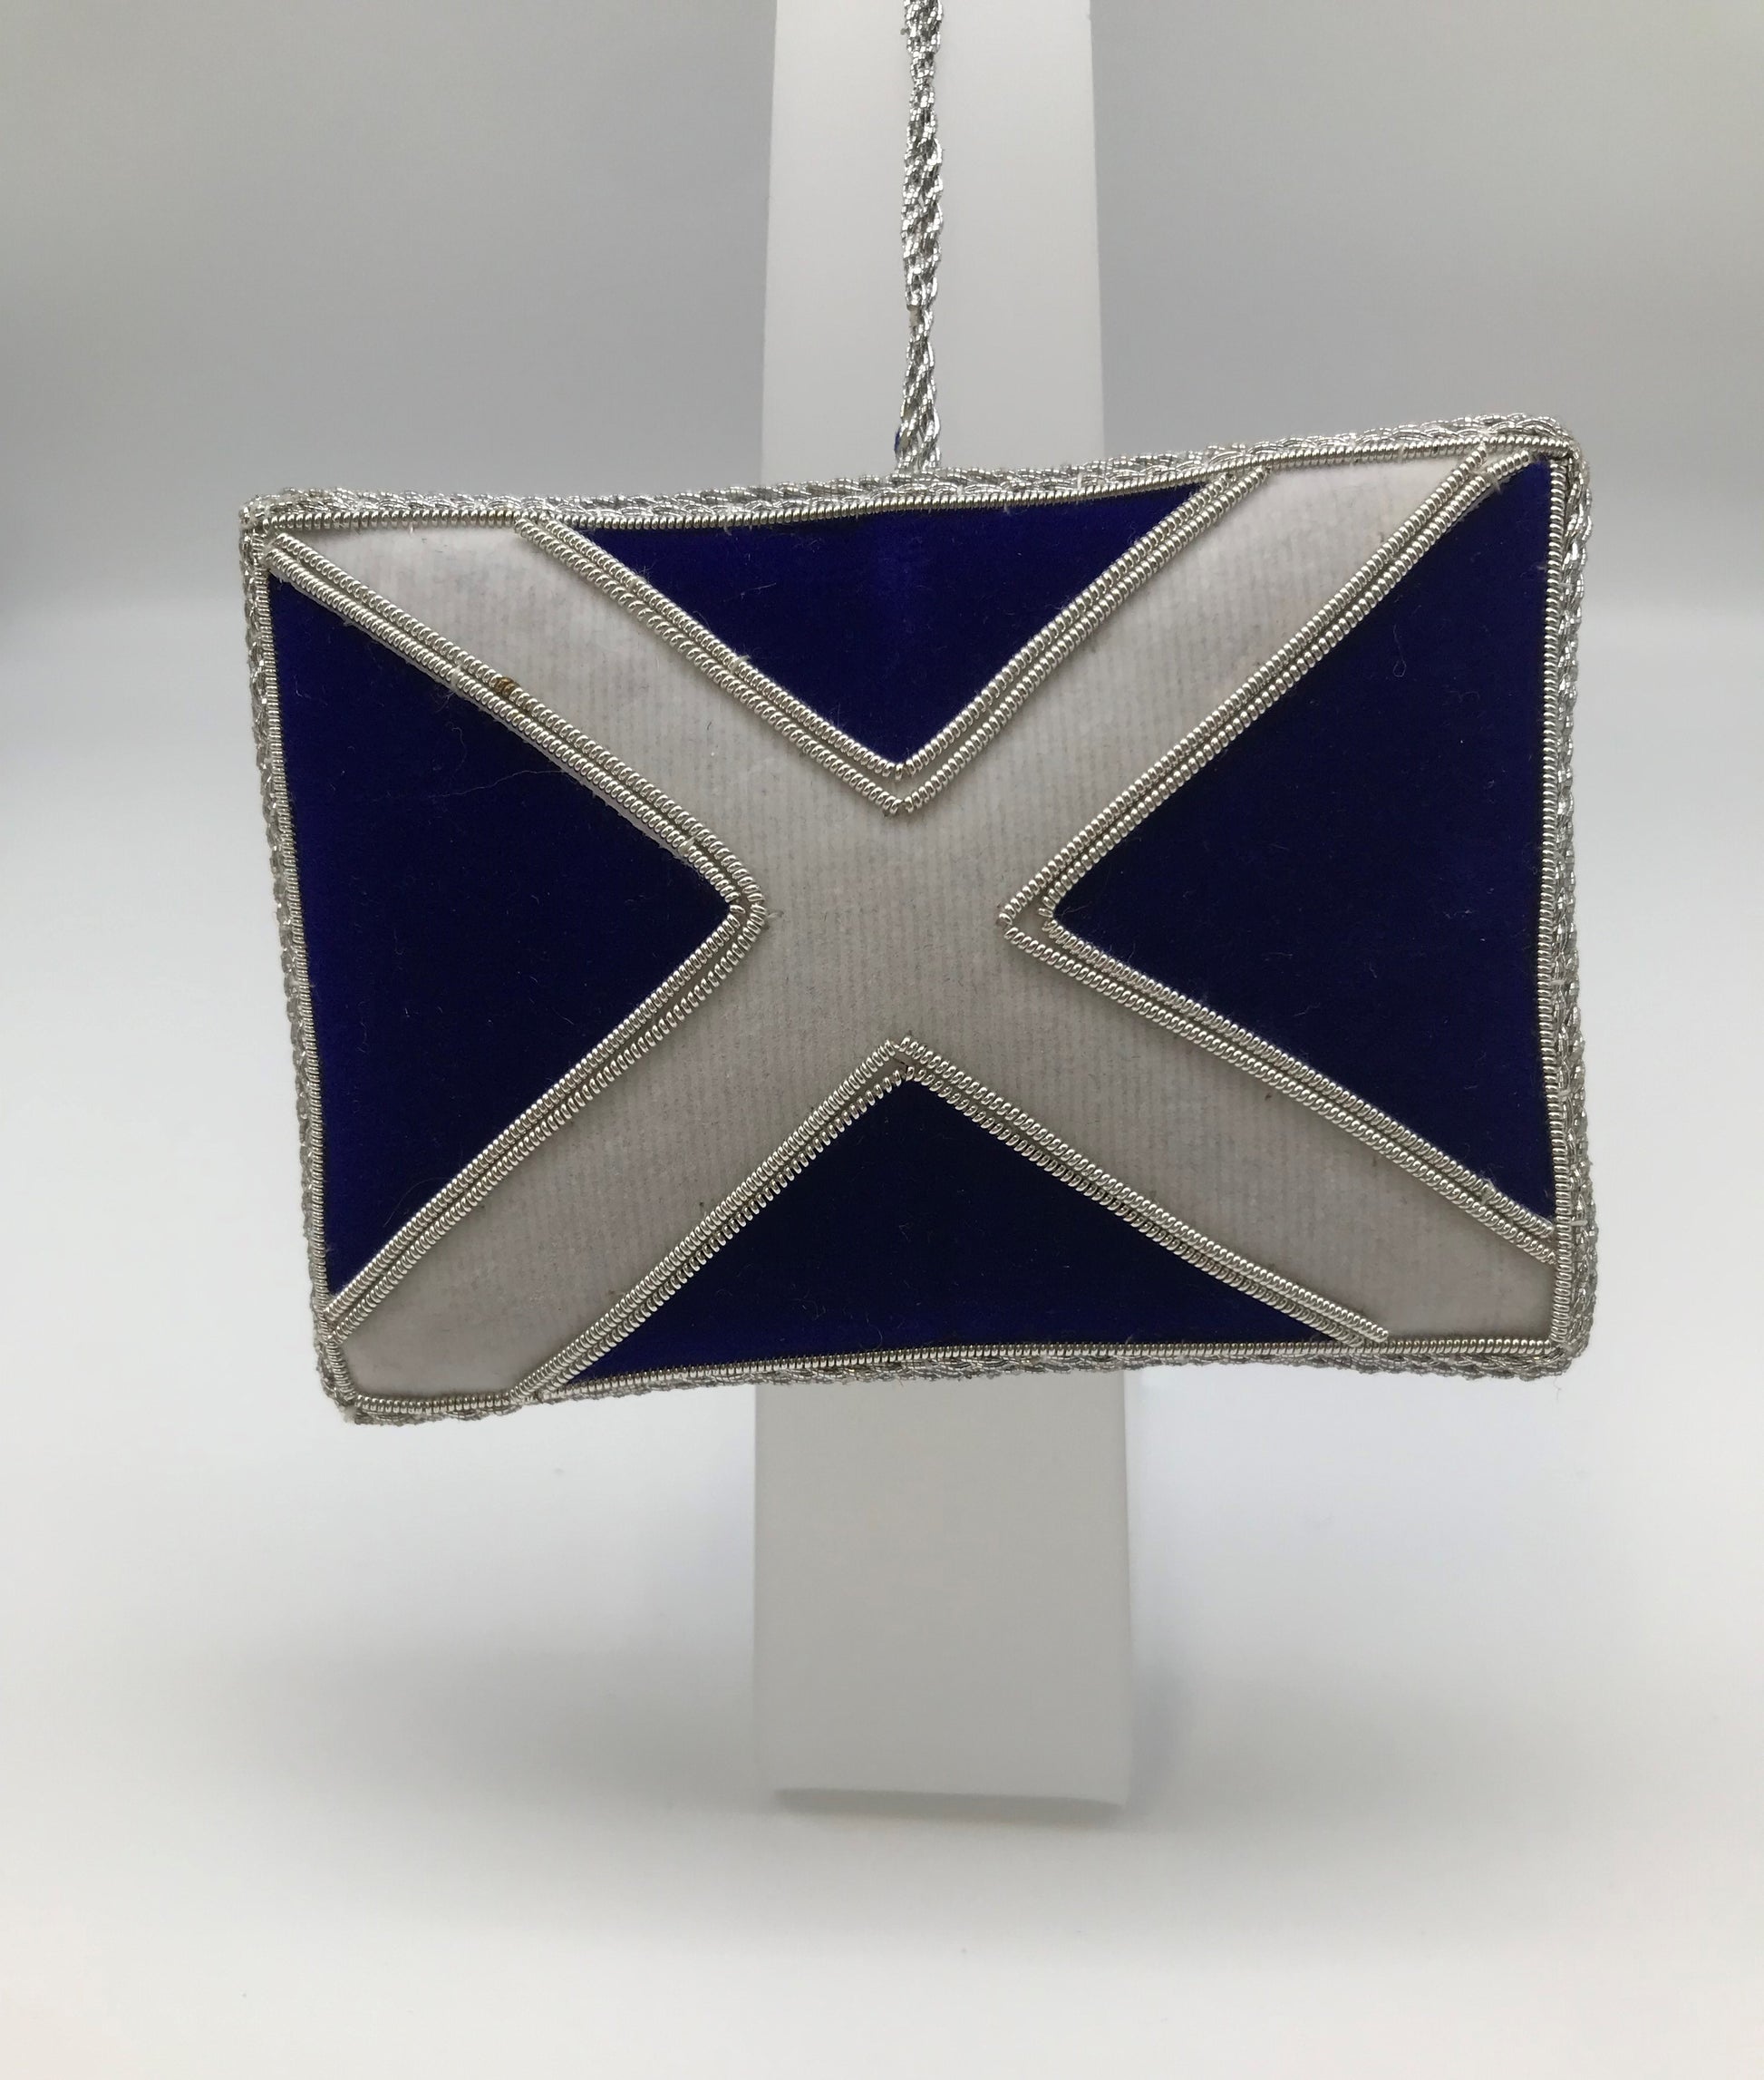 Other side of the decoration showing Scottish flag - white St Andrew's cross over blue fabric with decorative silver stitching.